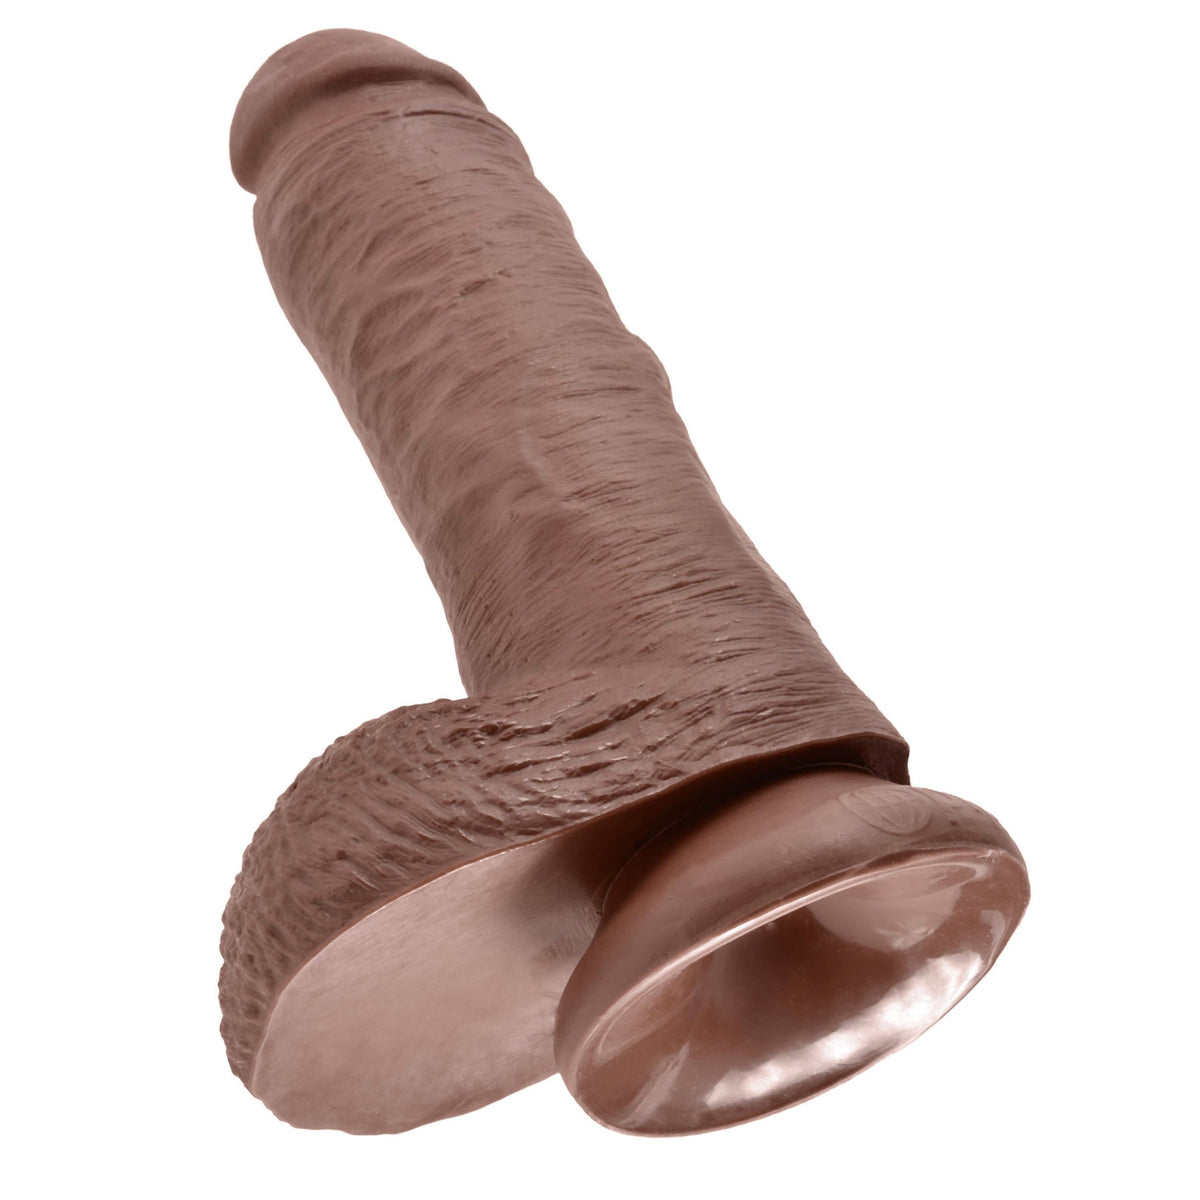 Pipedream - King Cock 8&quot; Cock with Balls (Dark Brown) PD1842 CherryAffairs